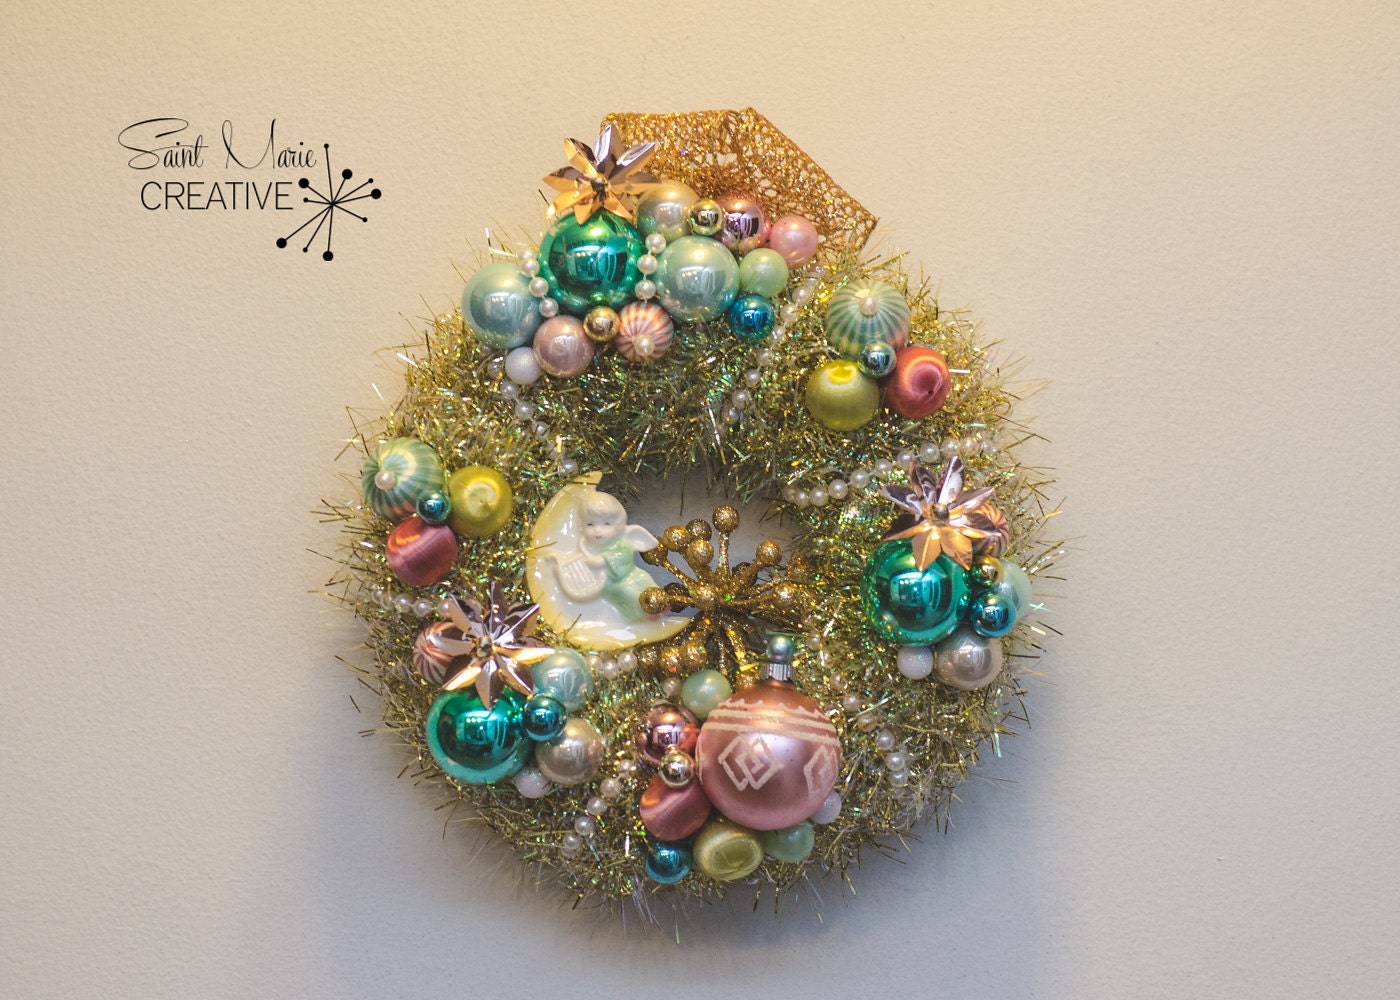 One of my mini creations! This 10" wreath in pastel shades would be great for a baby shower or for your Christmas decor.